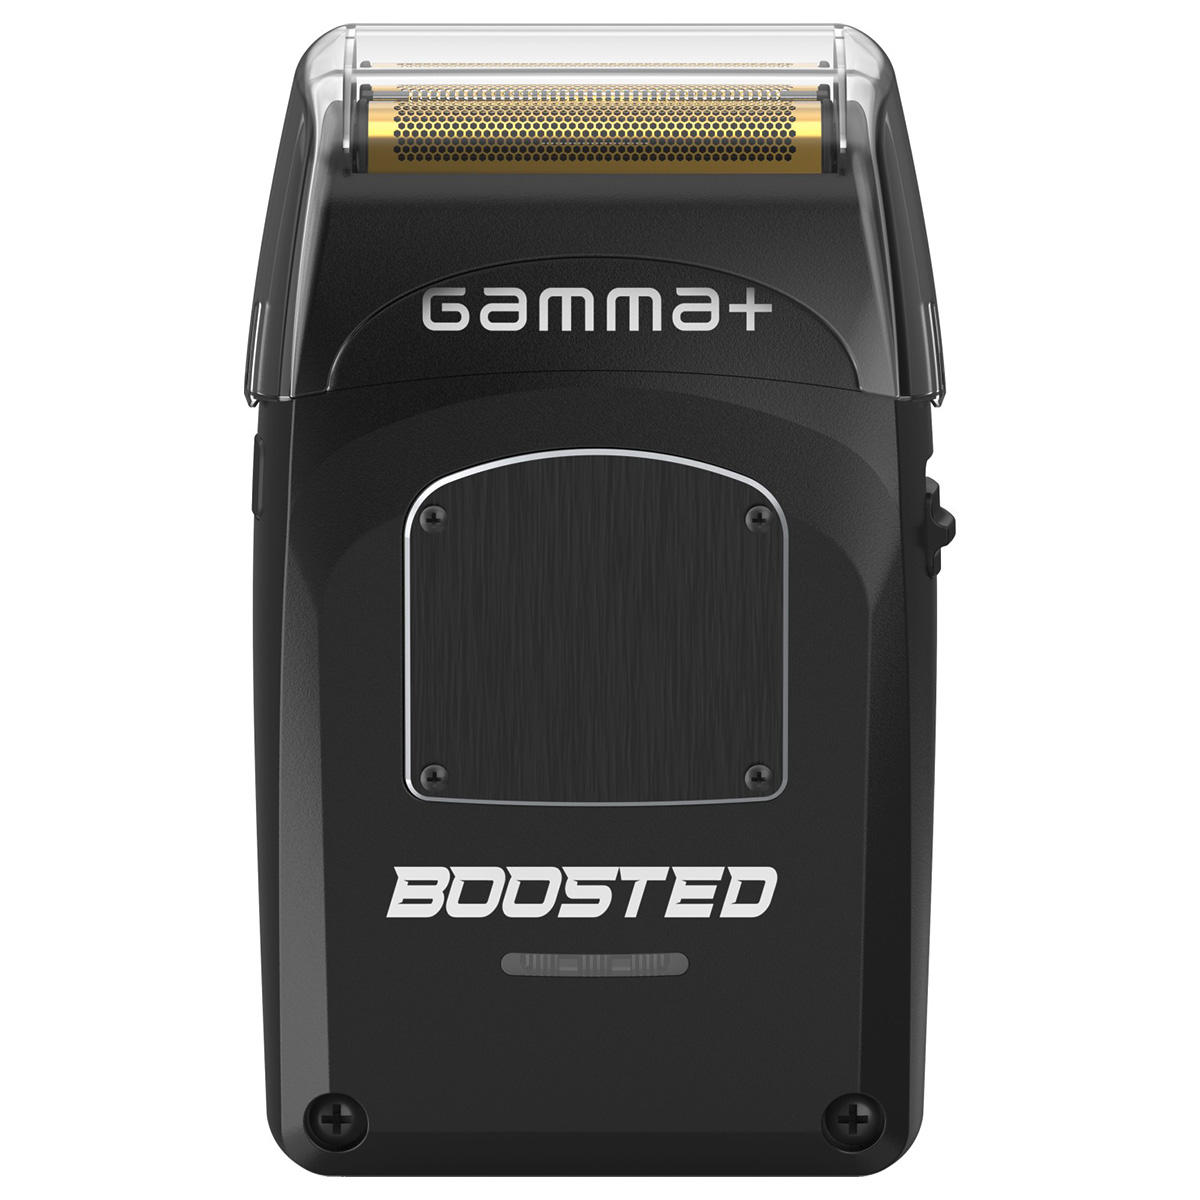 Gamma+ Boosted Shaver  - 4